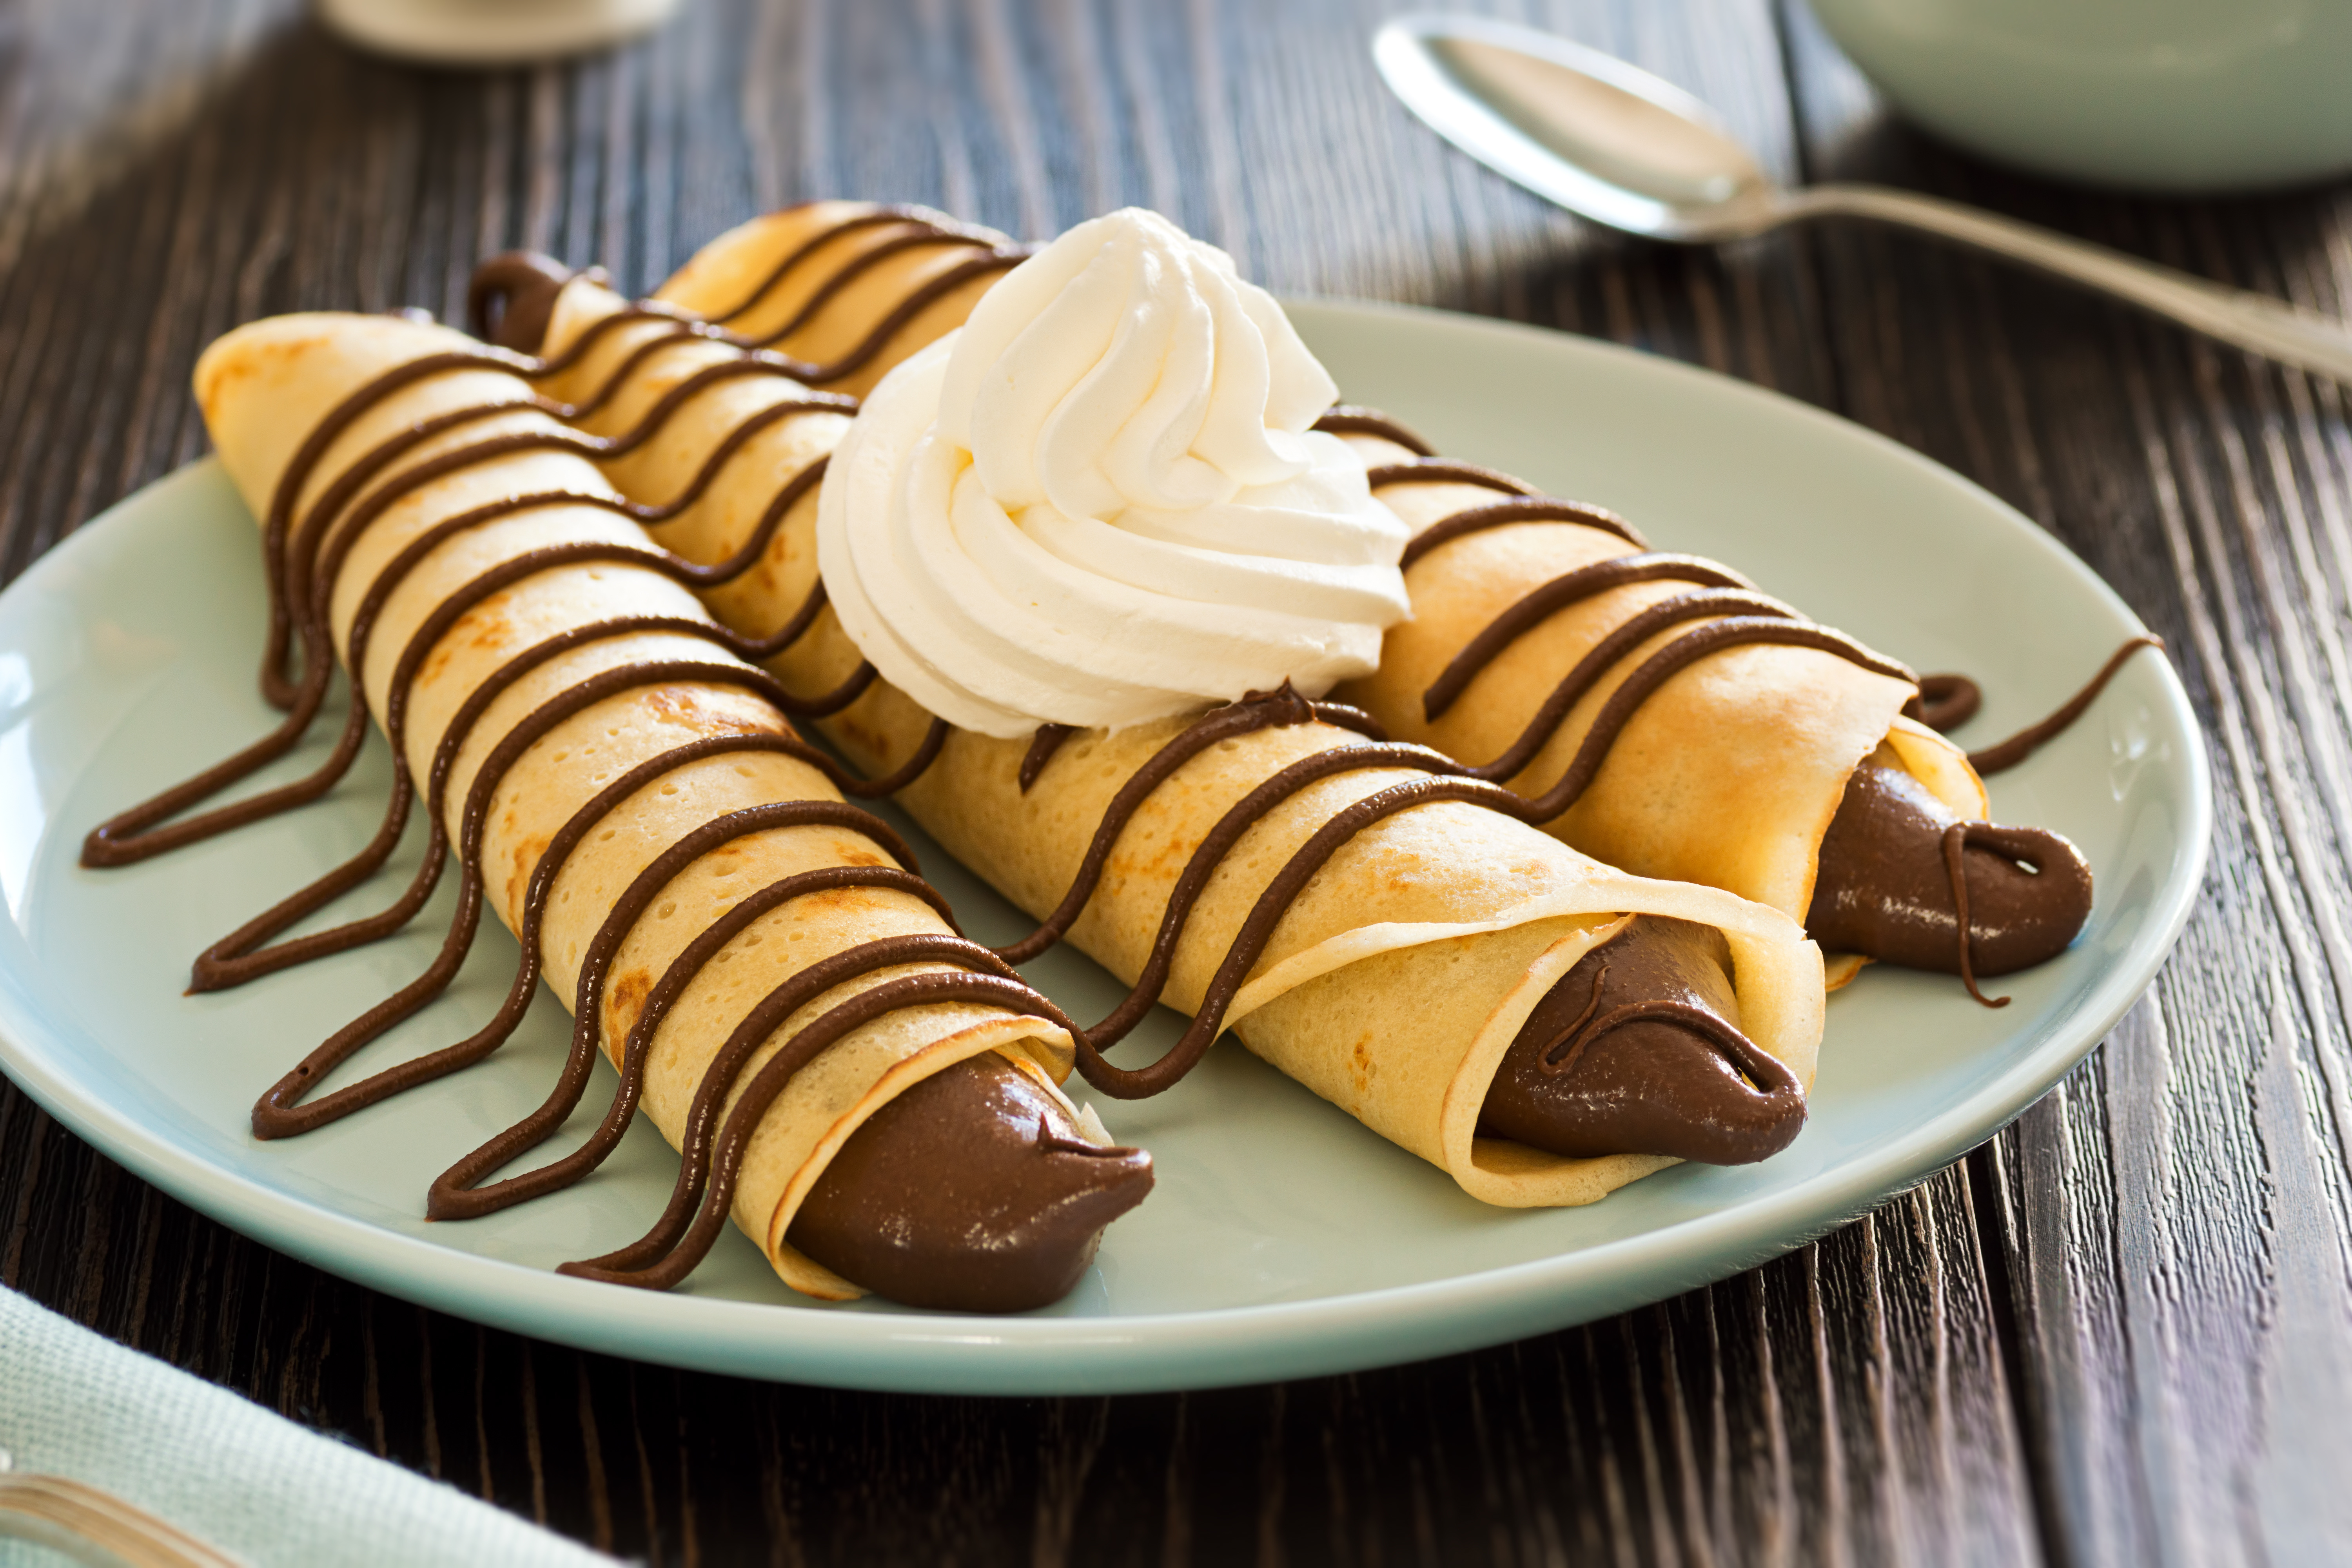 Dessert Crepes with Nutella or Chocolate Spread and Whipped Cream